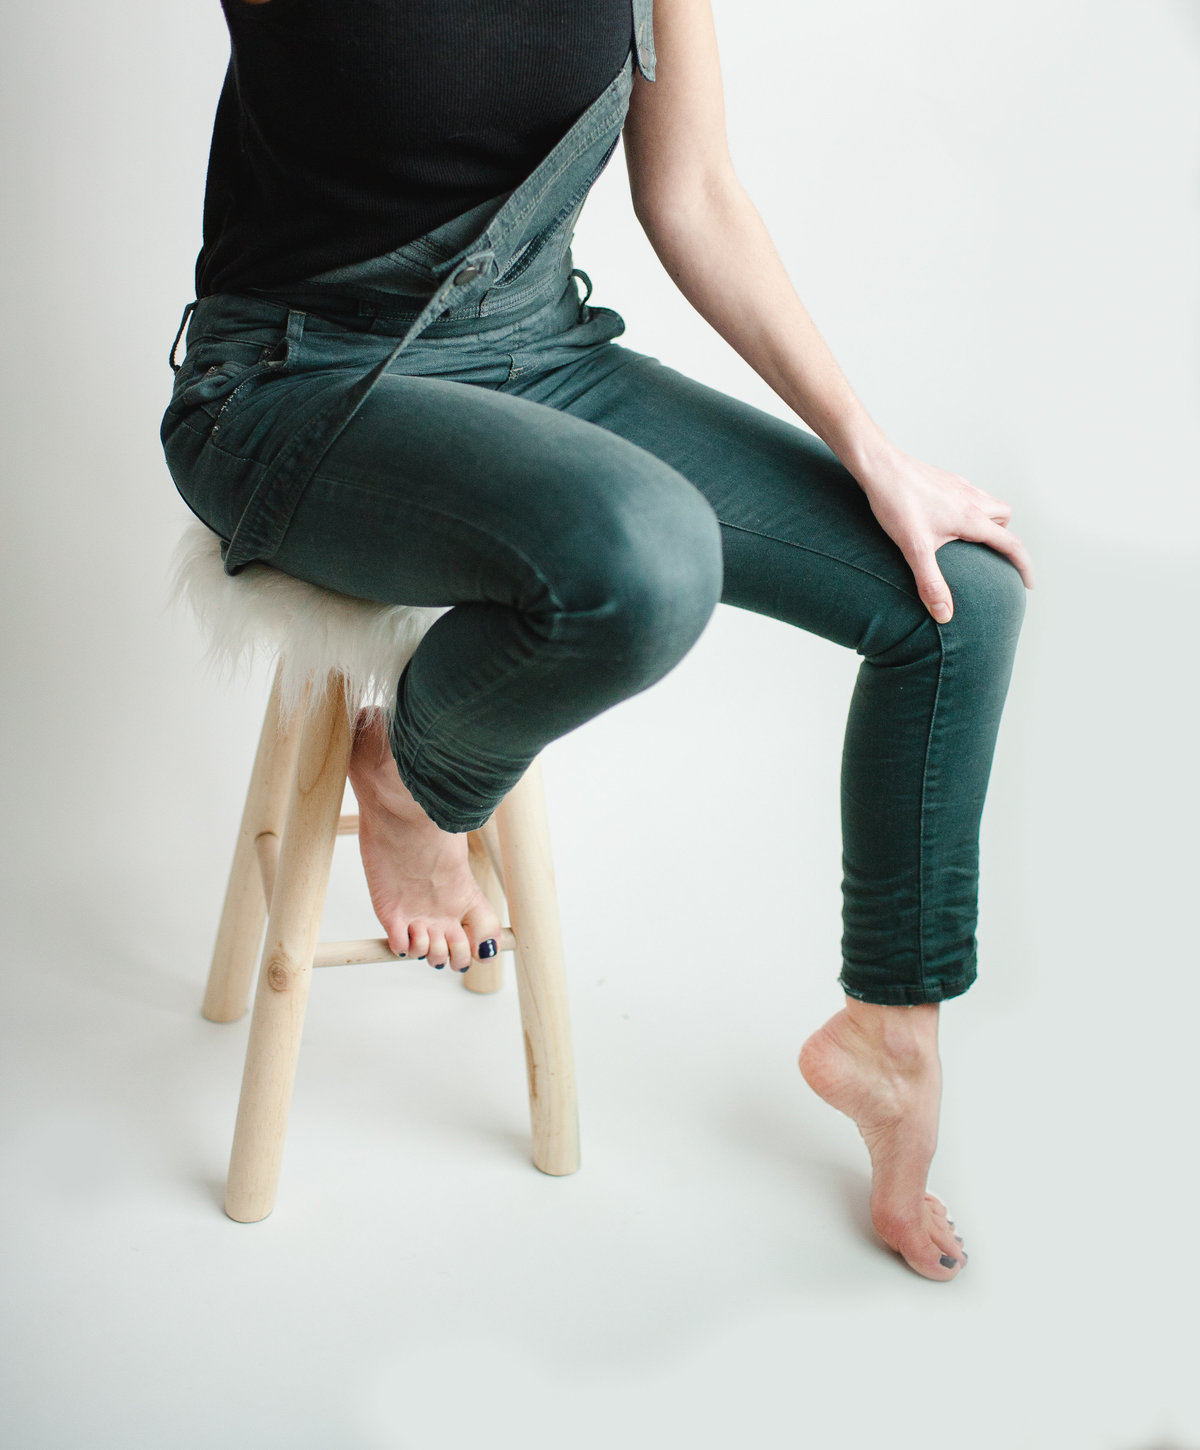 artist portrait of legs on a stool over a white background